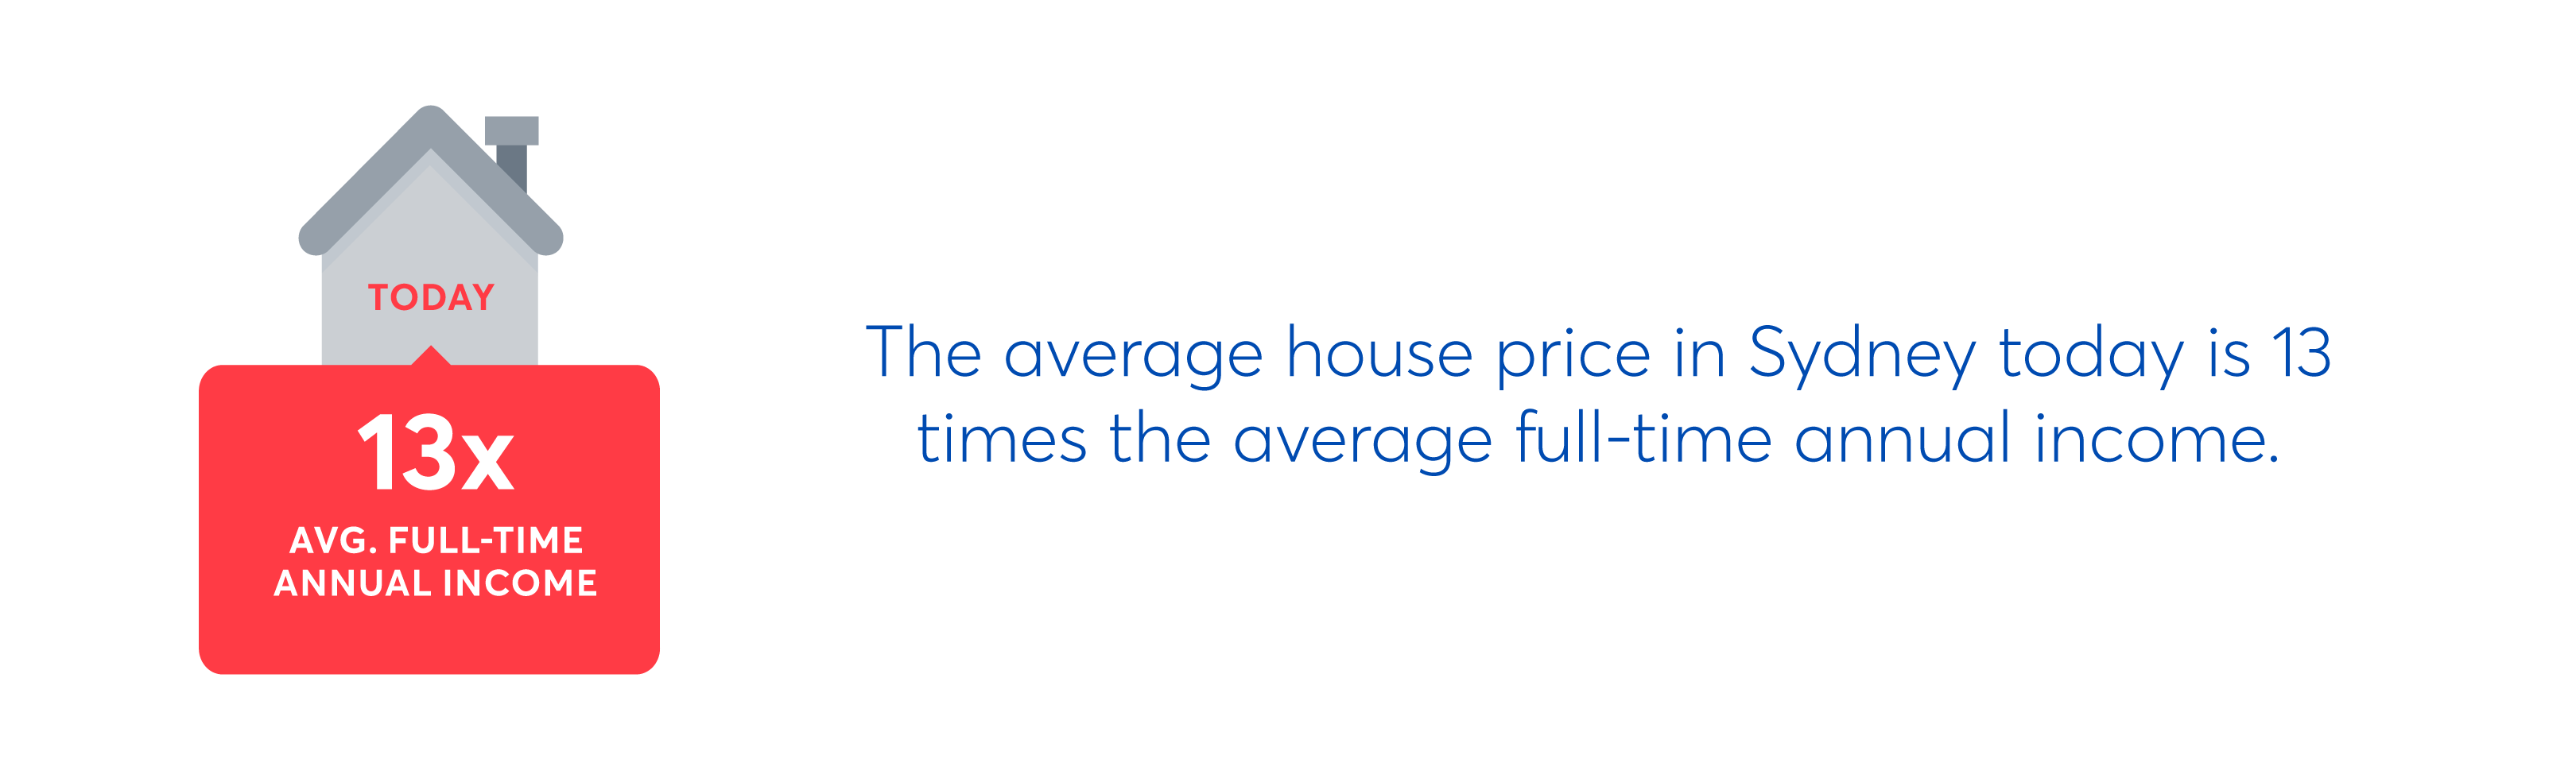 Average house price is 13 times average income